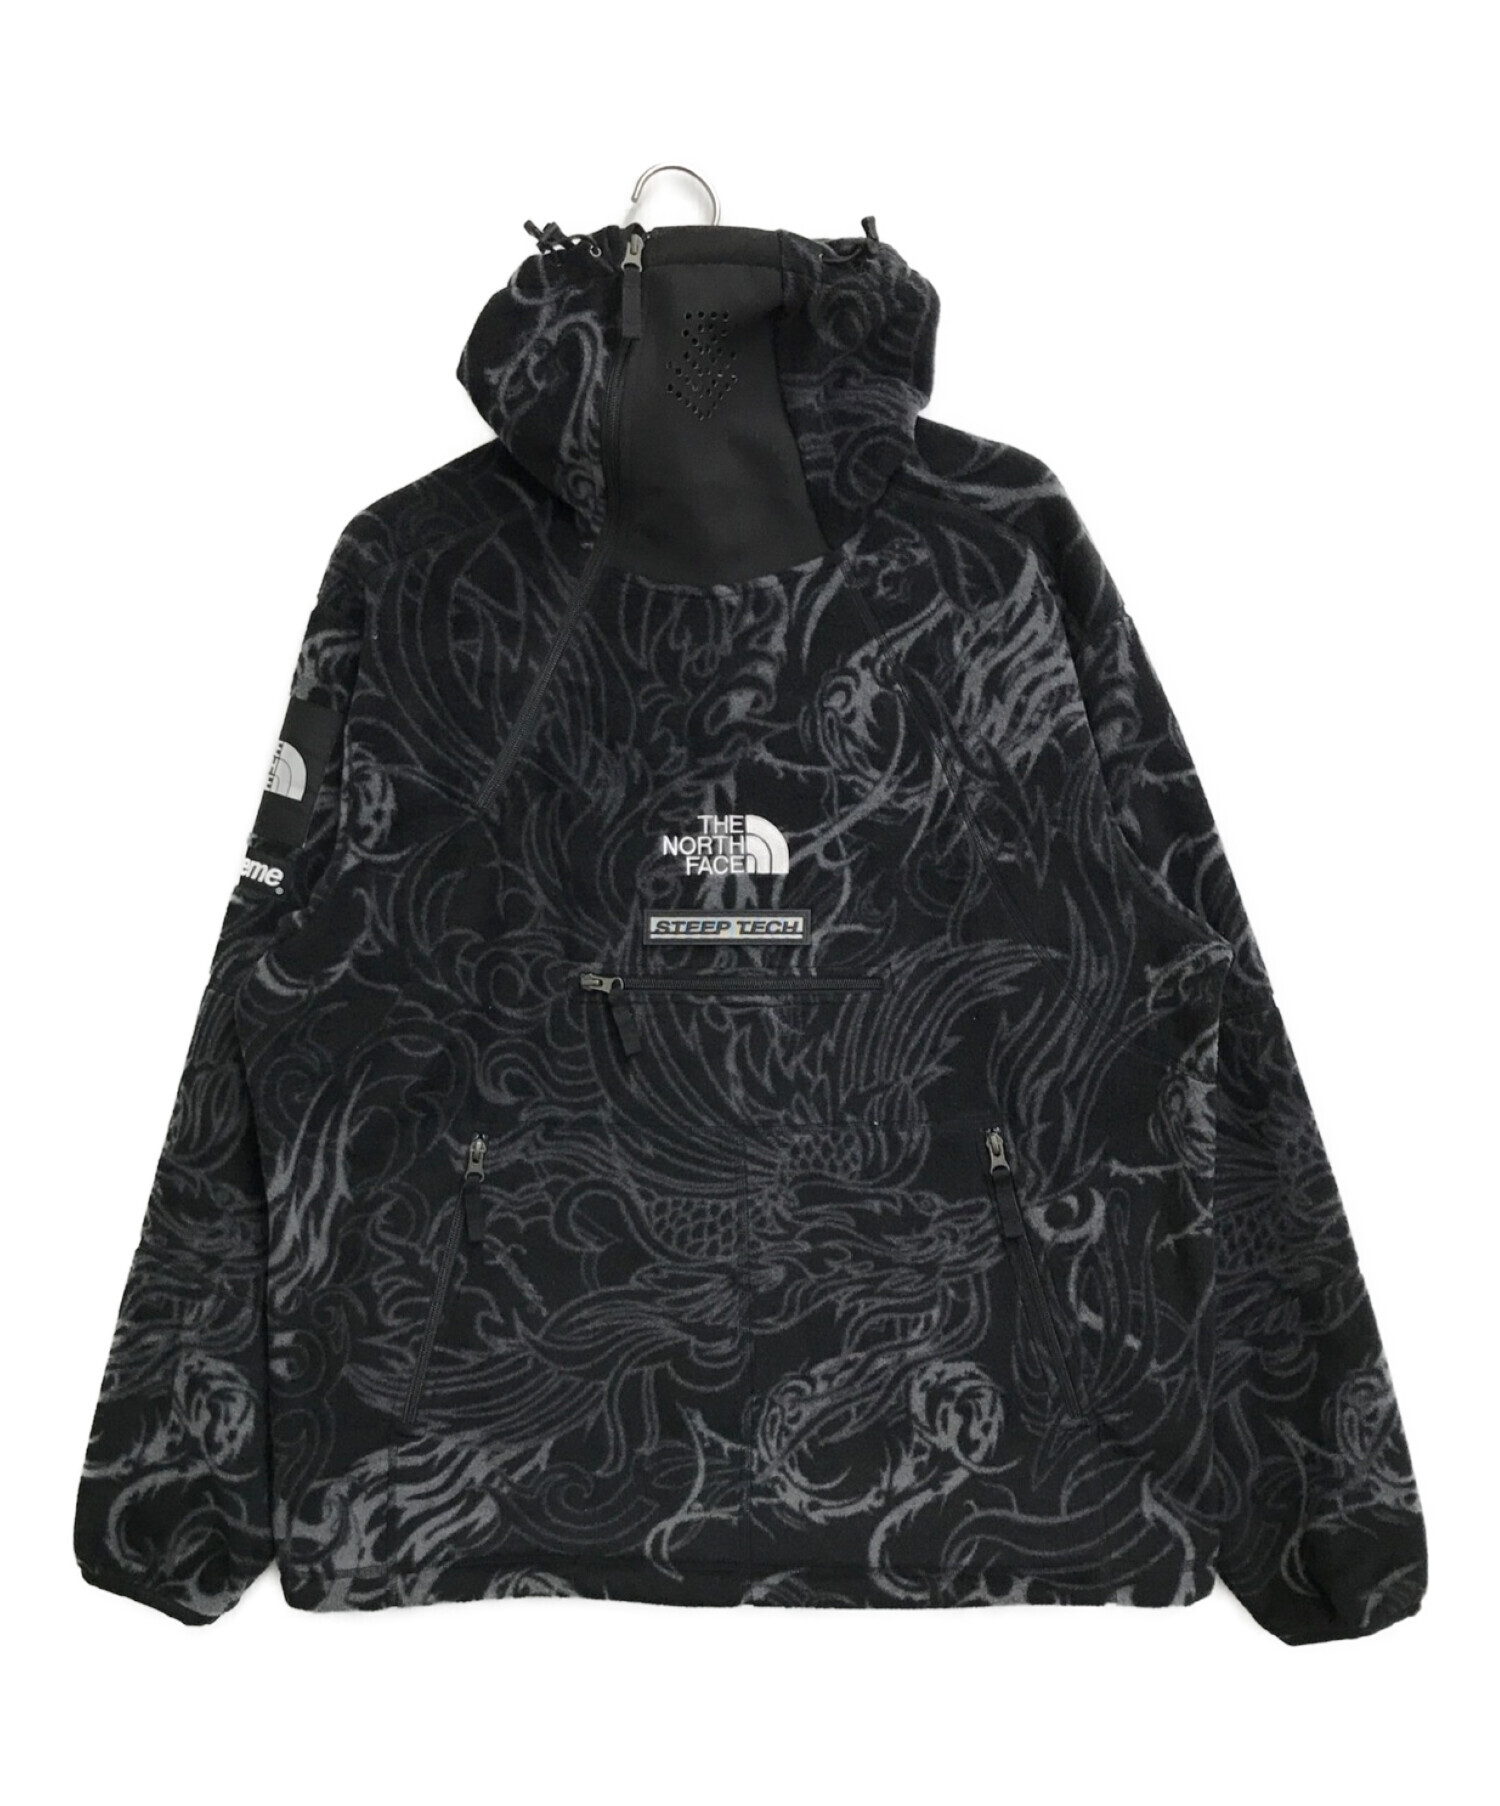 Supreme / The North Face Steep Tech Fleeその他 - その他